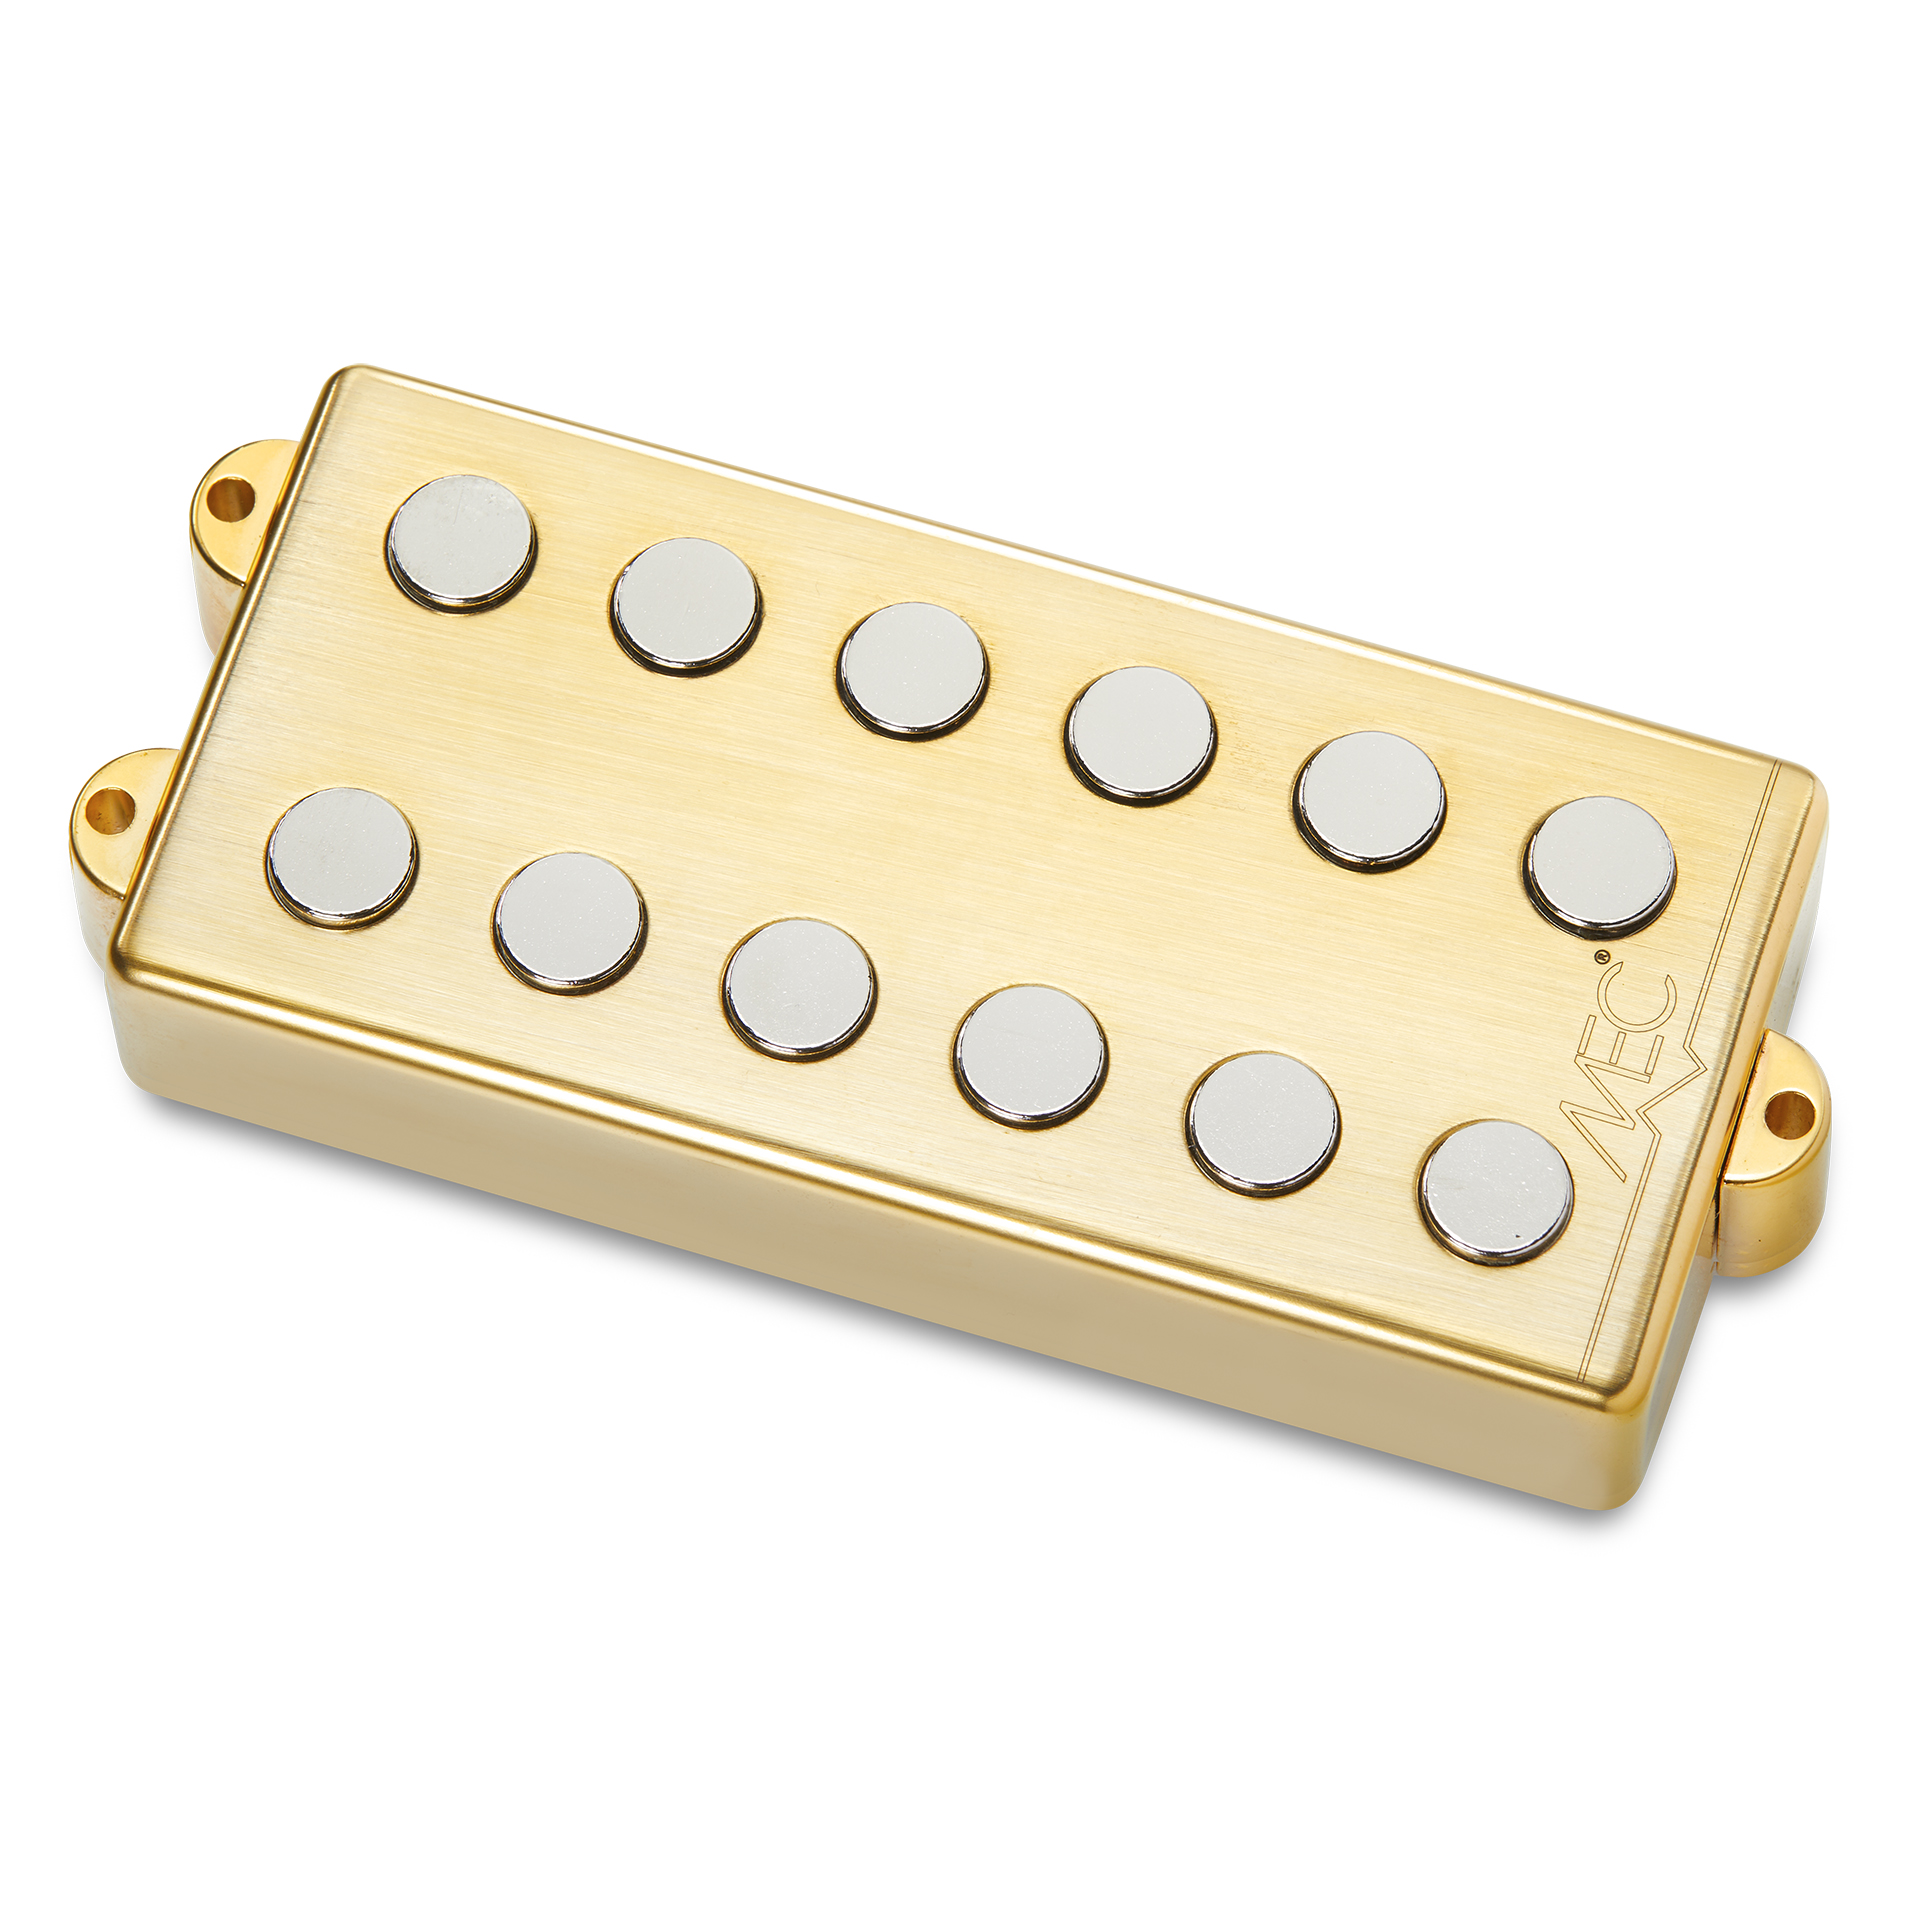 MEC Passive MM-Style Bass Pickup, Metal Cover, 6-String, Neck - Brushed Gold